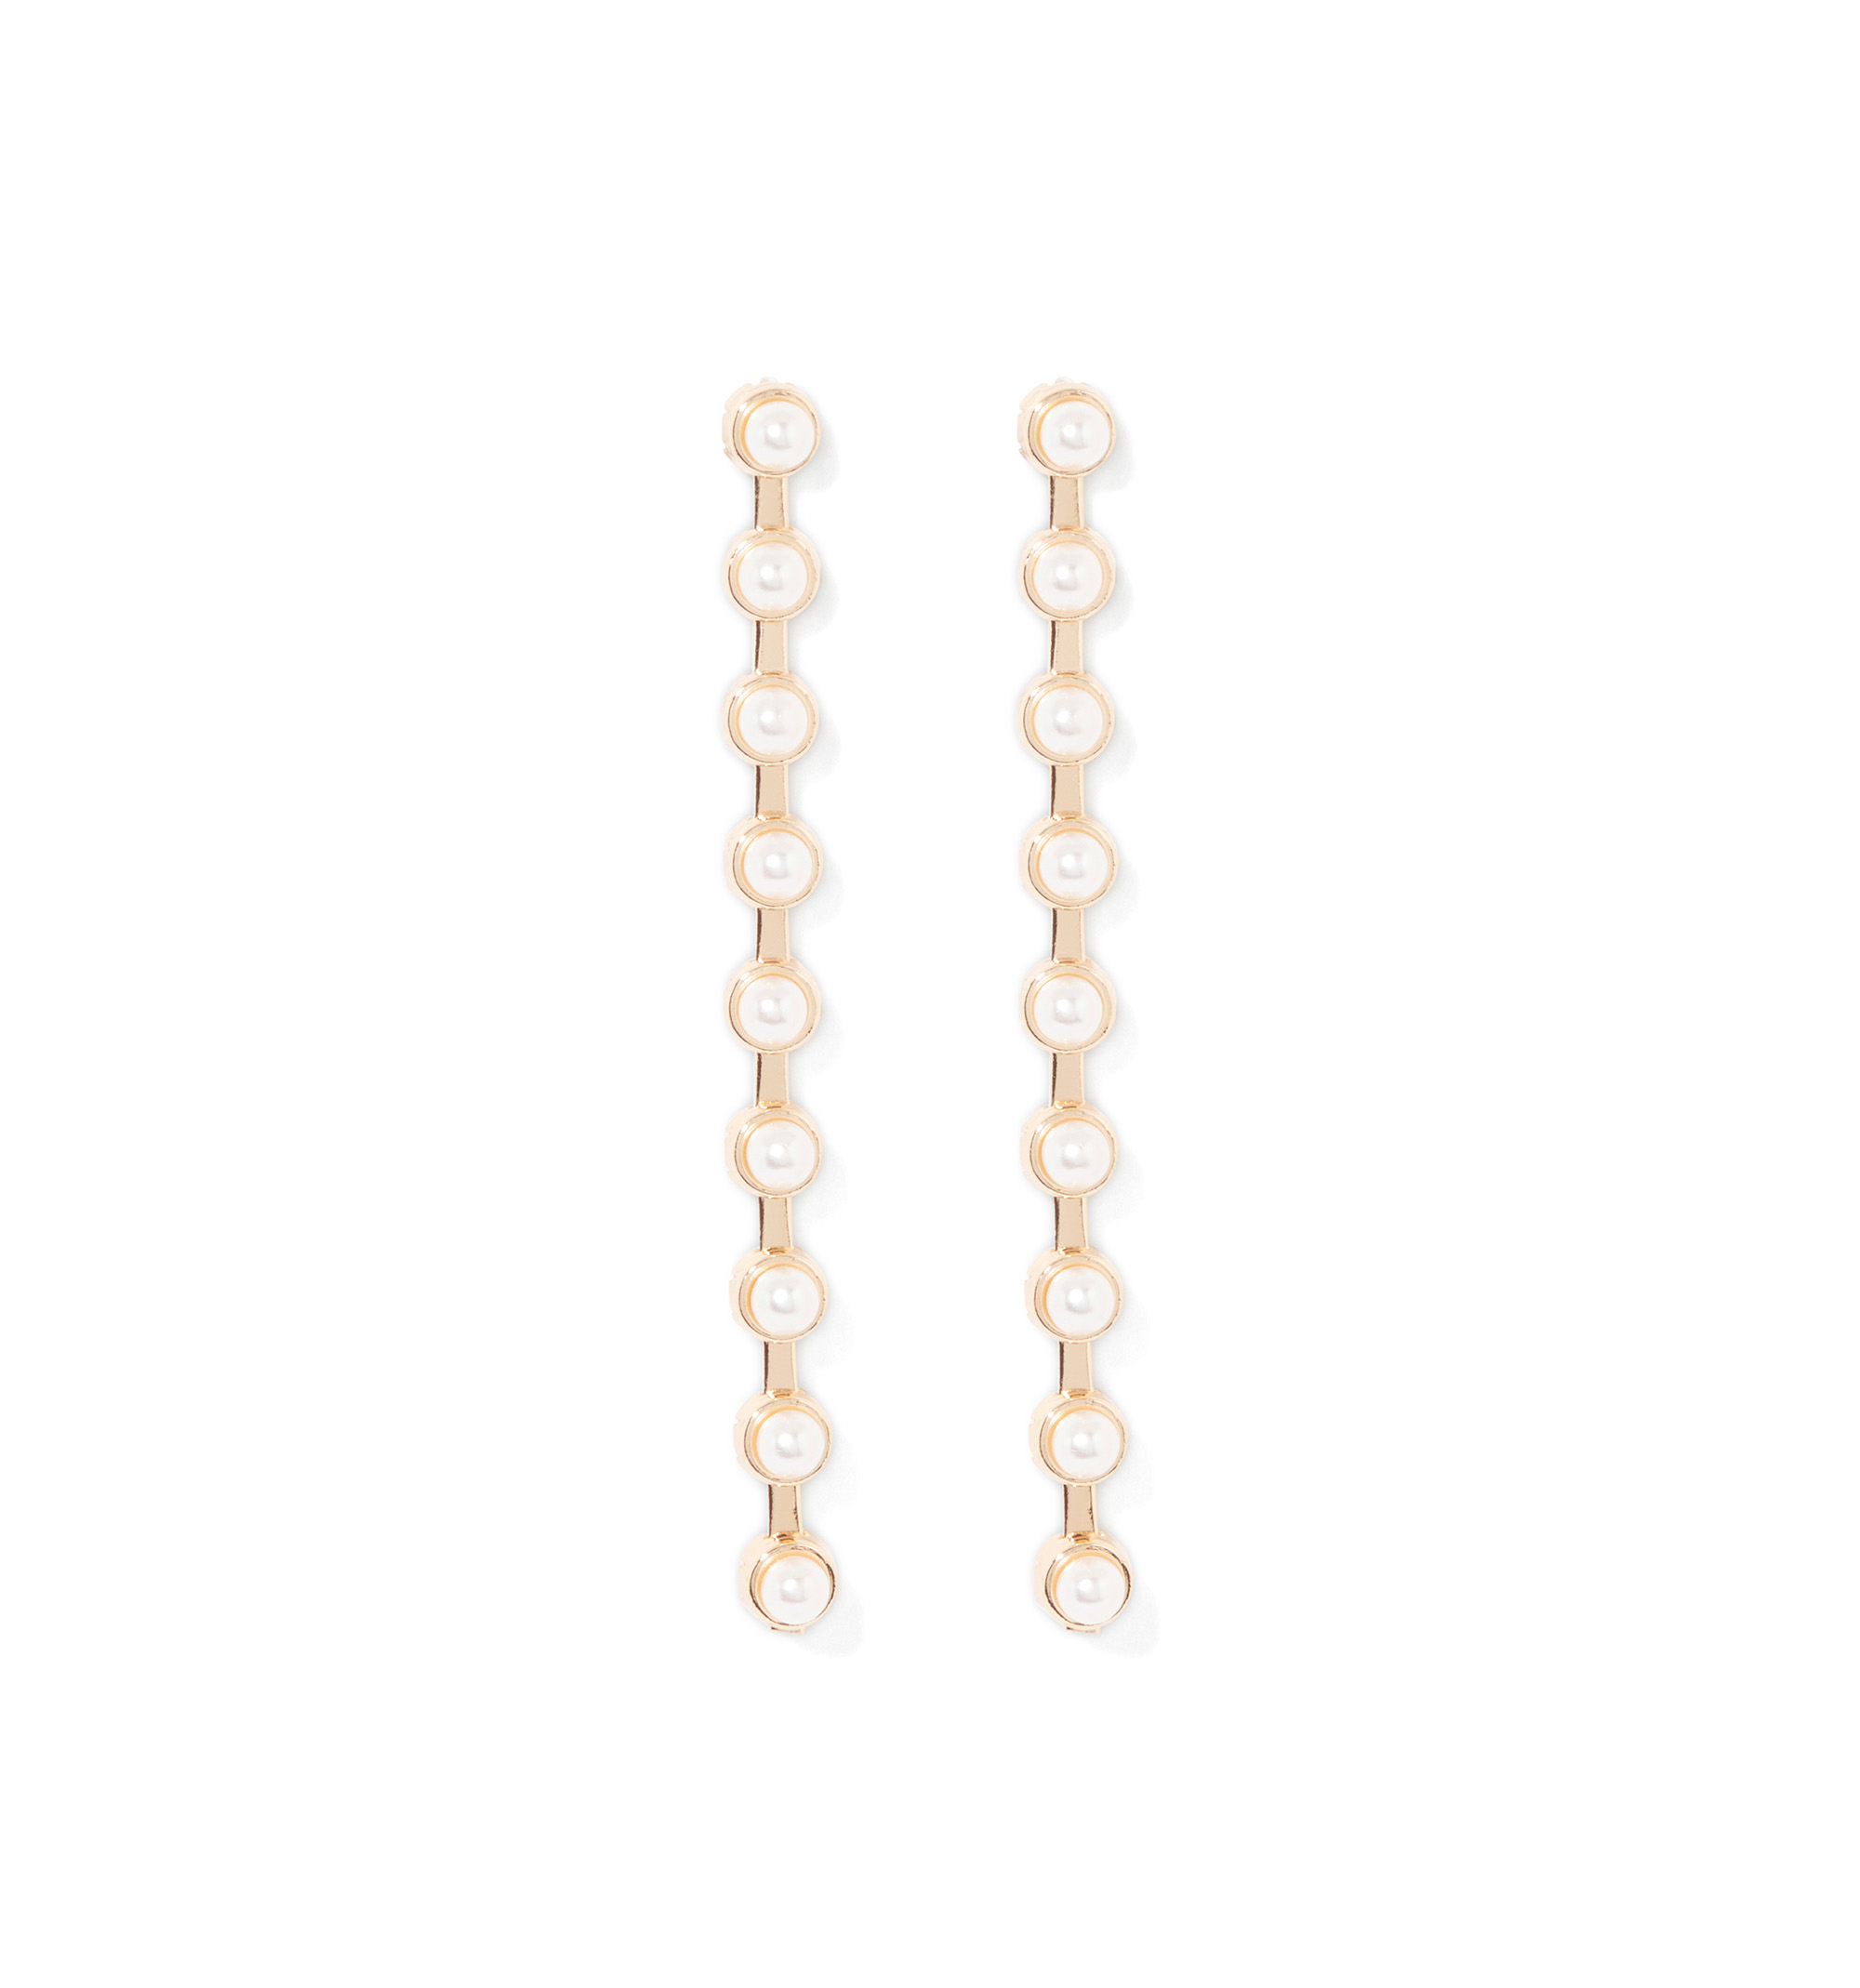 Cascade Pearl Earrings - Pink Freshwater Pearl Charms on Sterling Silver |  got sparkles